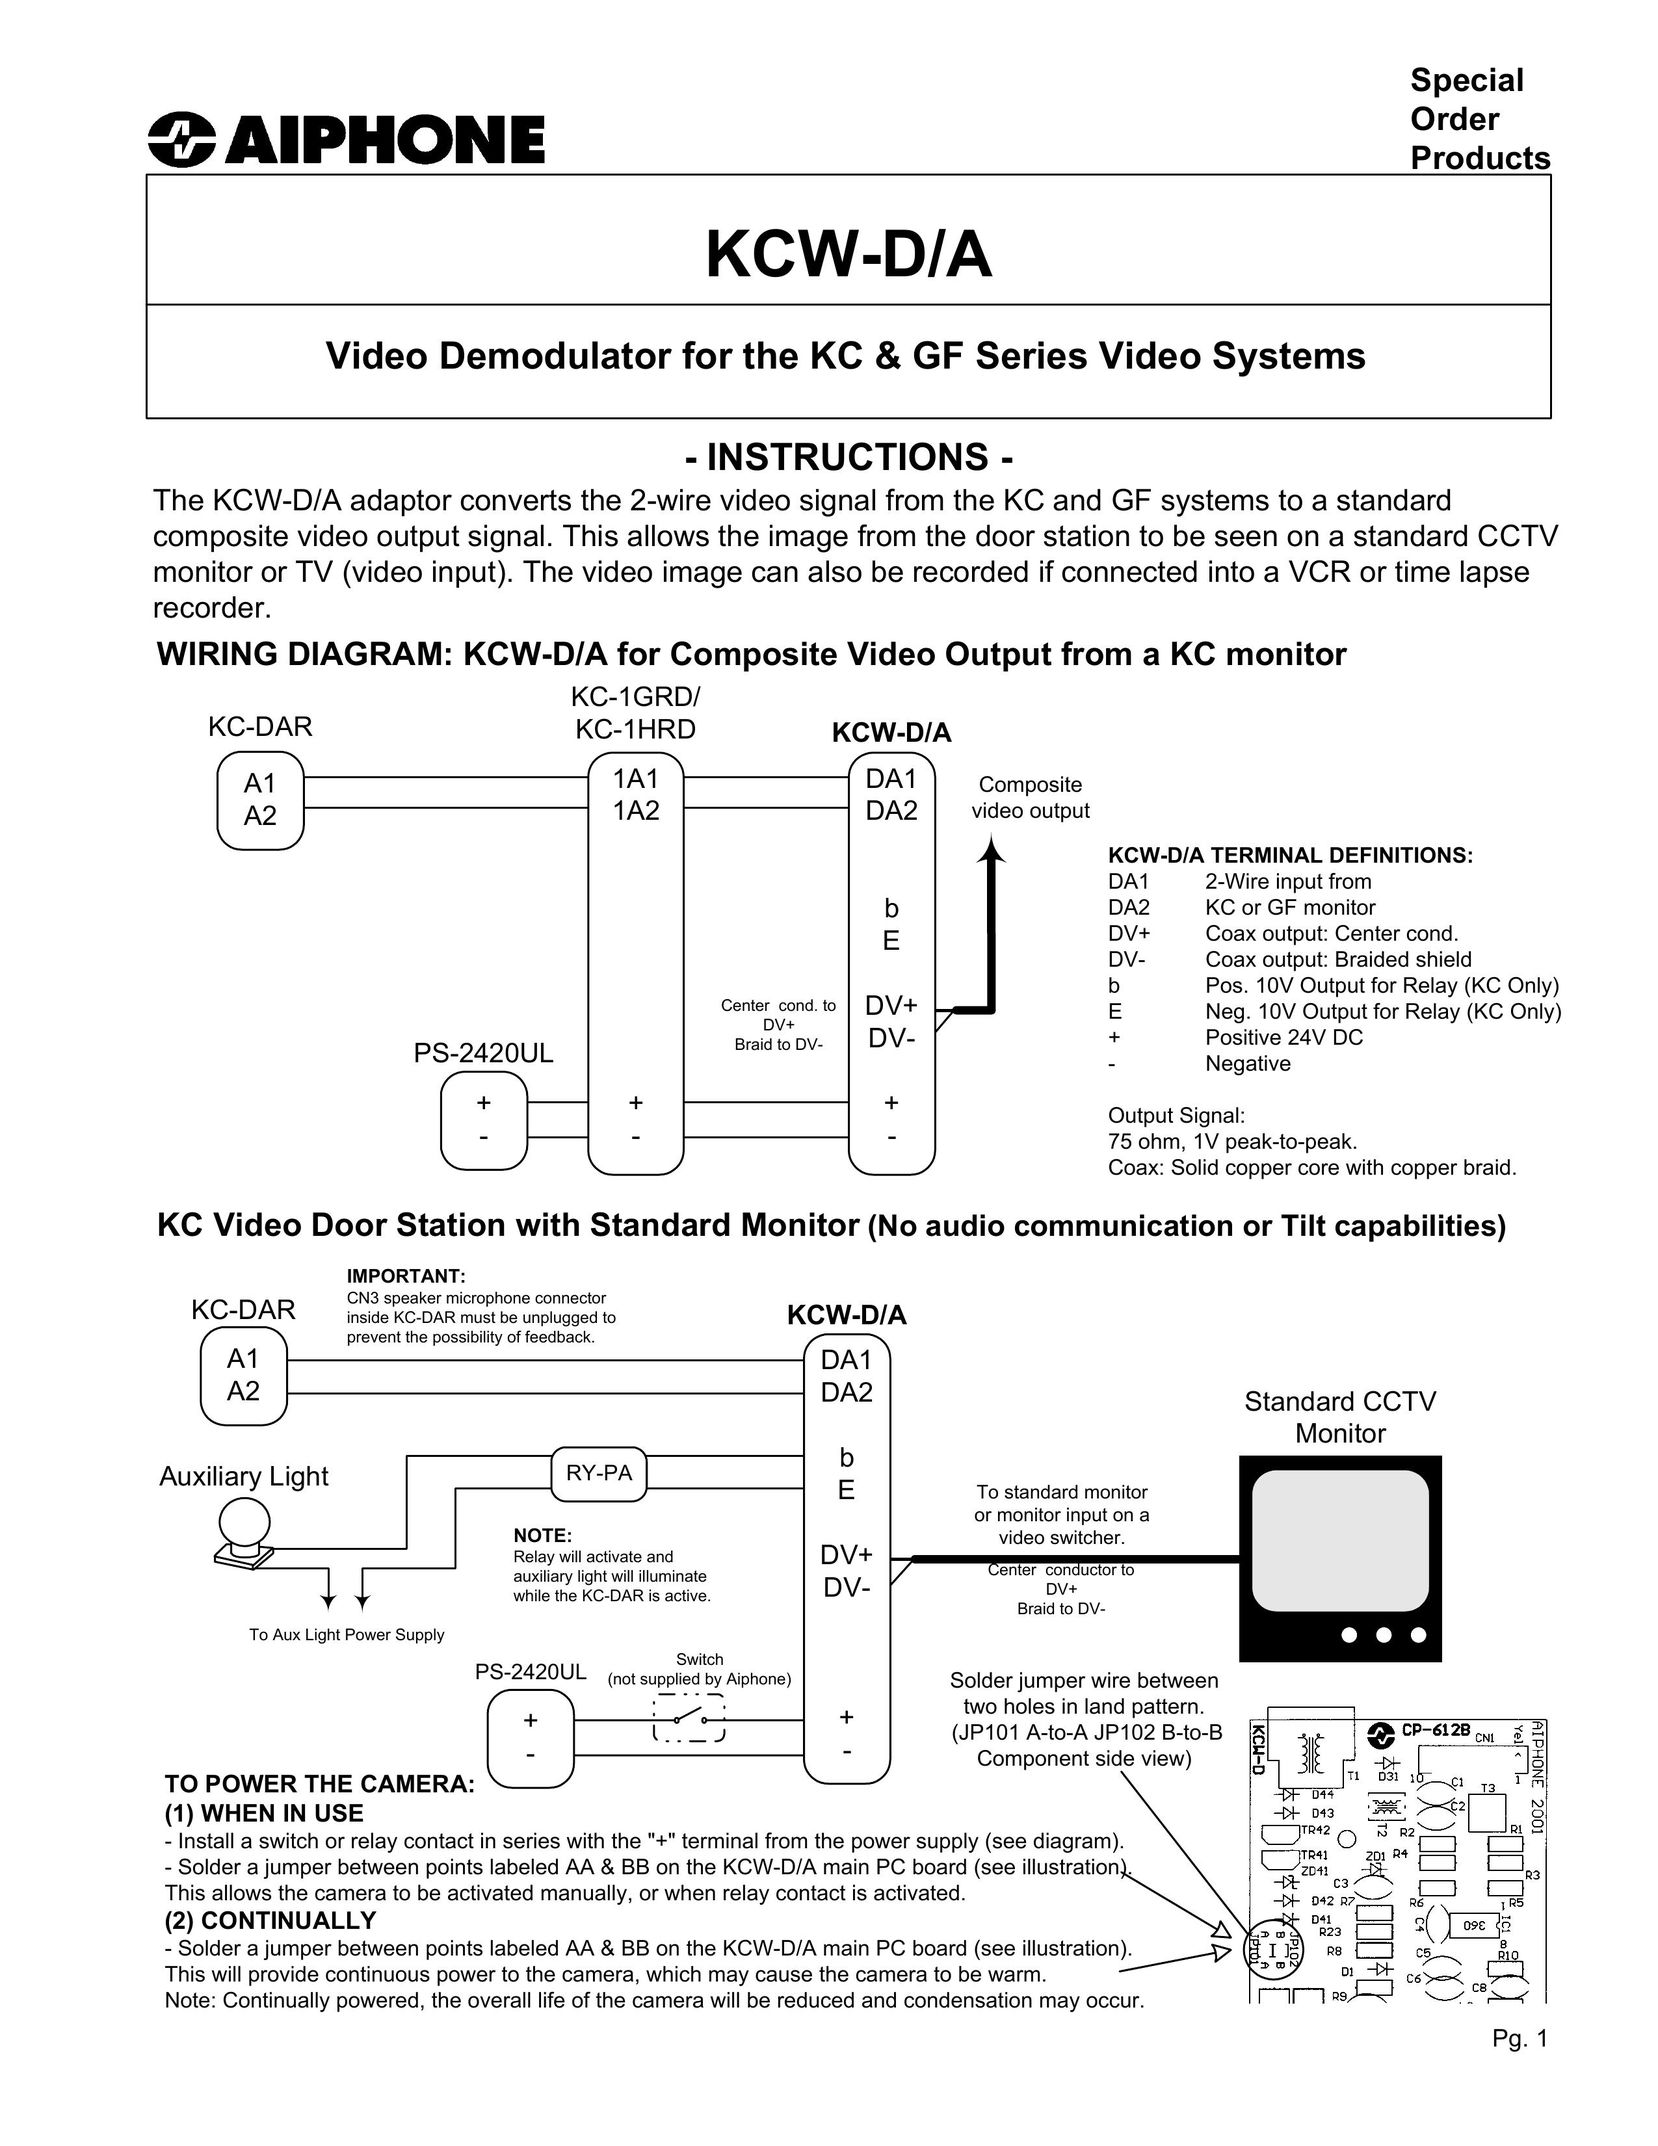 Aiphone A Car Video System User Manual